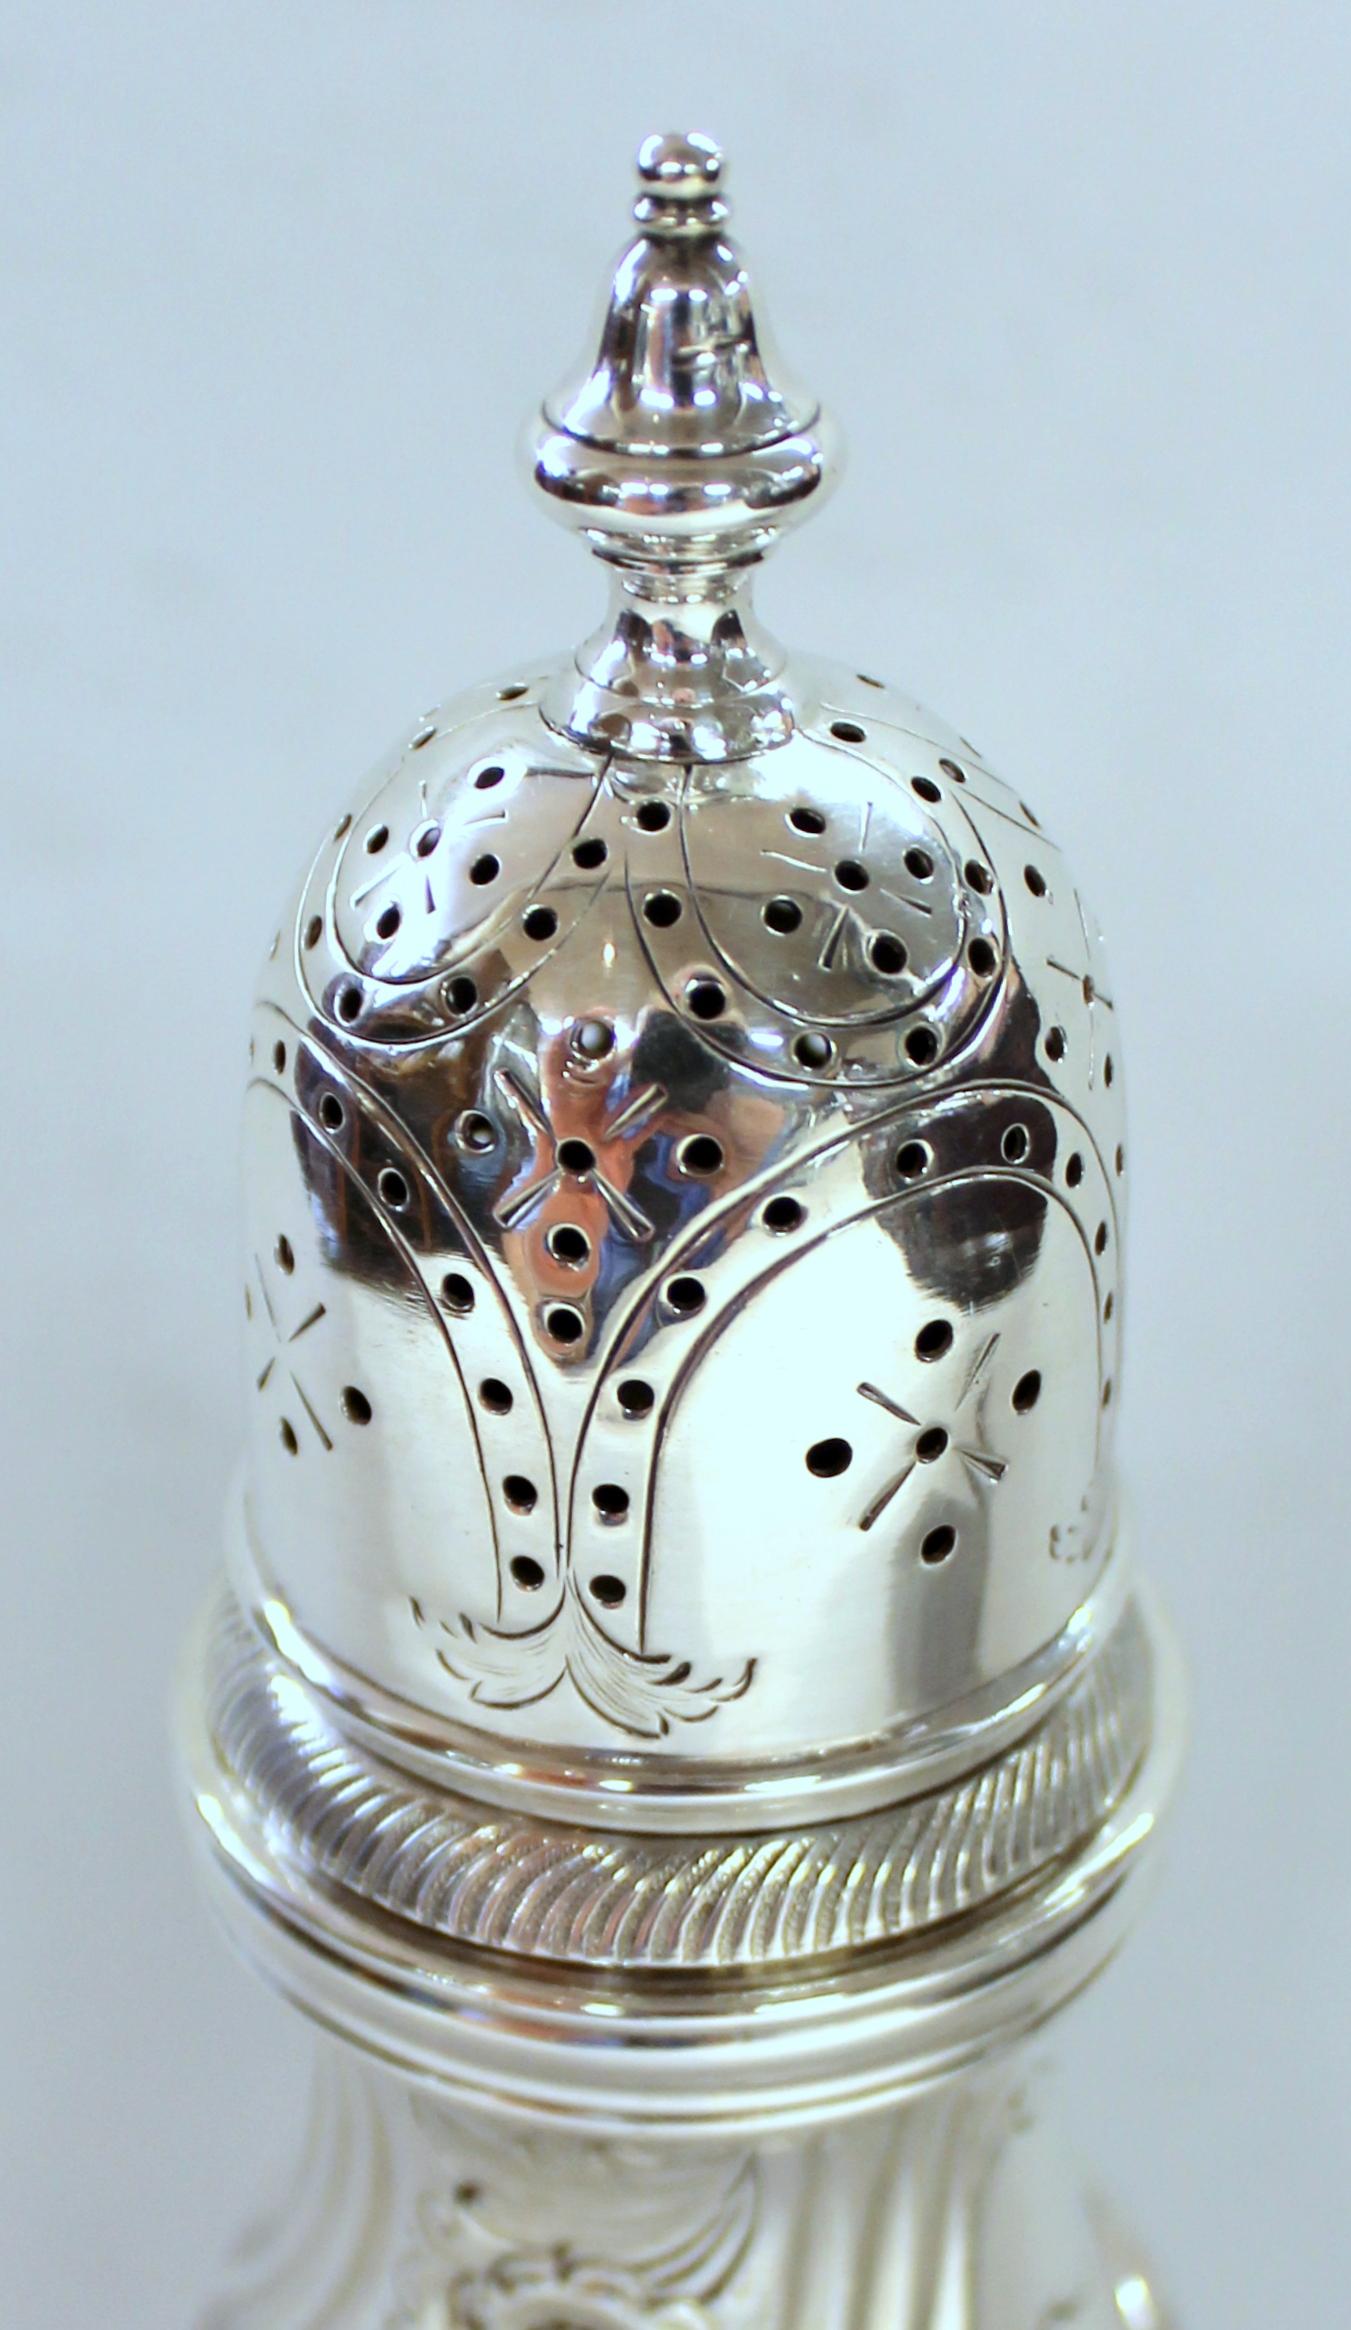 Very fine quality Old English silver plate hand chased sugar dredger, muffineer or shaker.
No apparent maker's marks found and tested for sterling, but tests silver plate. Exceptional hand-chasing.
to silver plate. Mint condition, no plate loss.